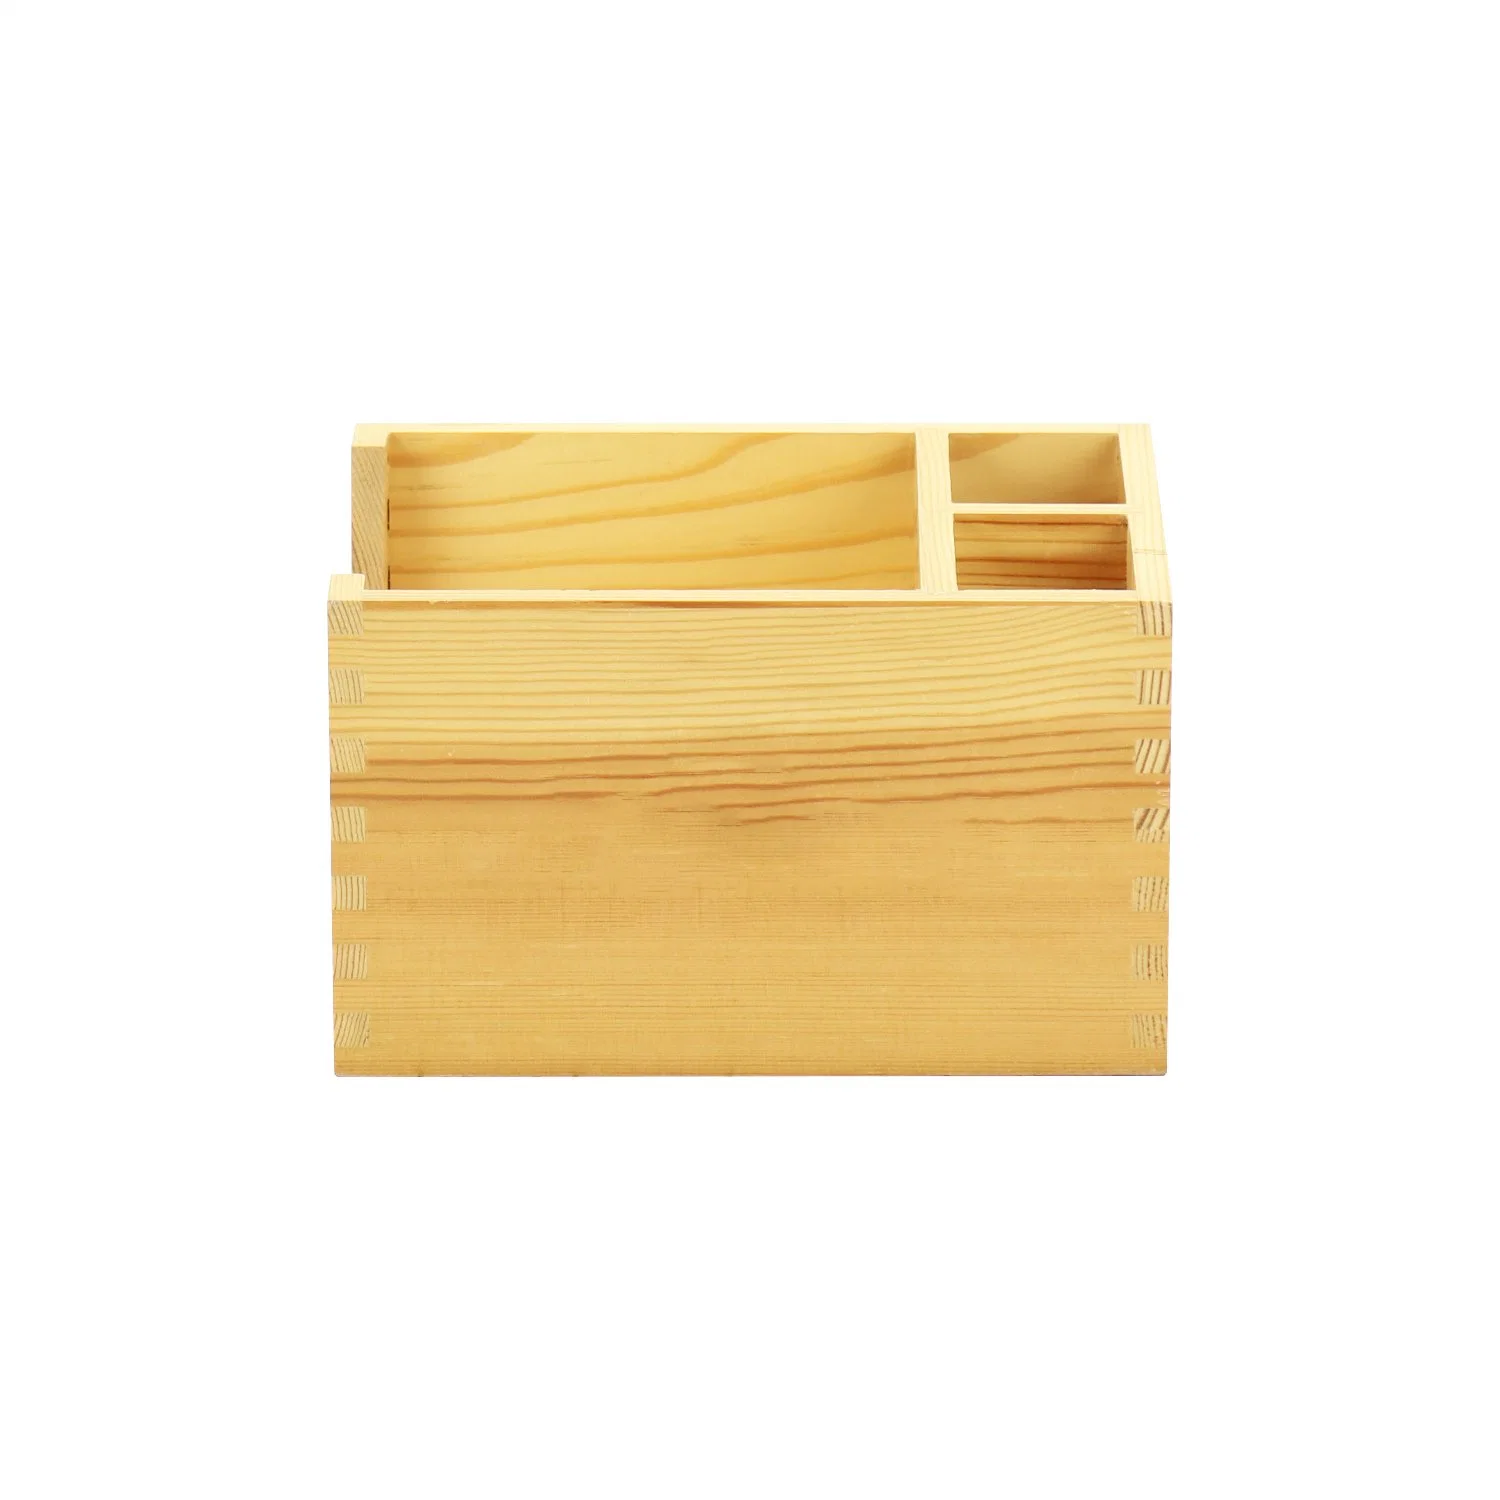 Wood Square Storage Organizer Box for Craft Home Wooden Box,